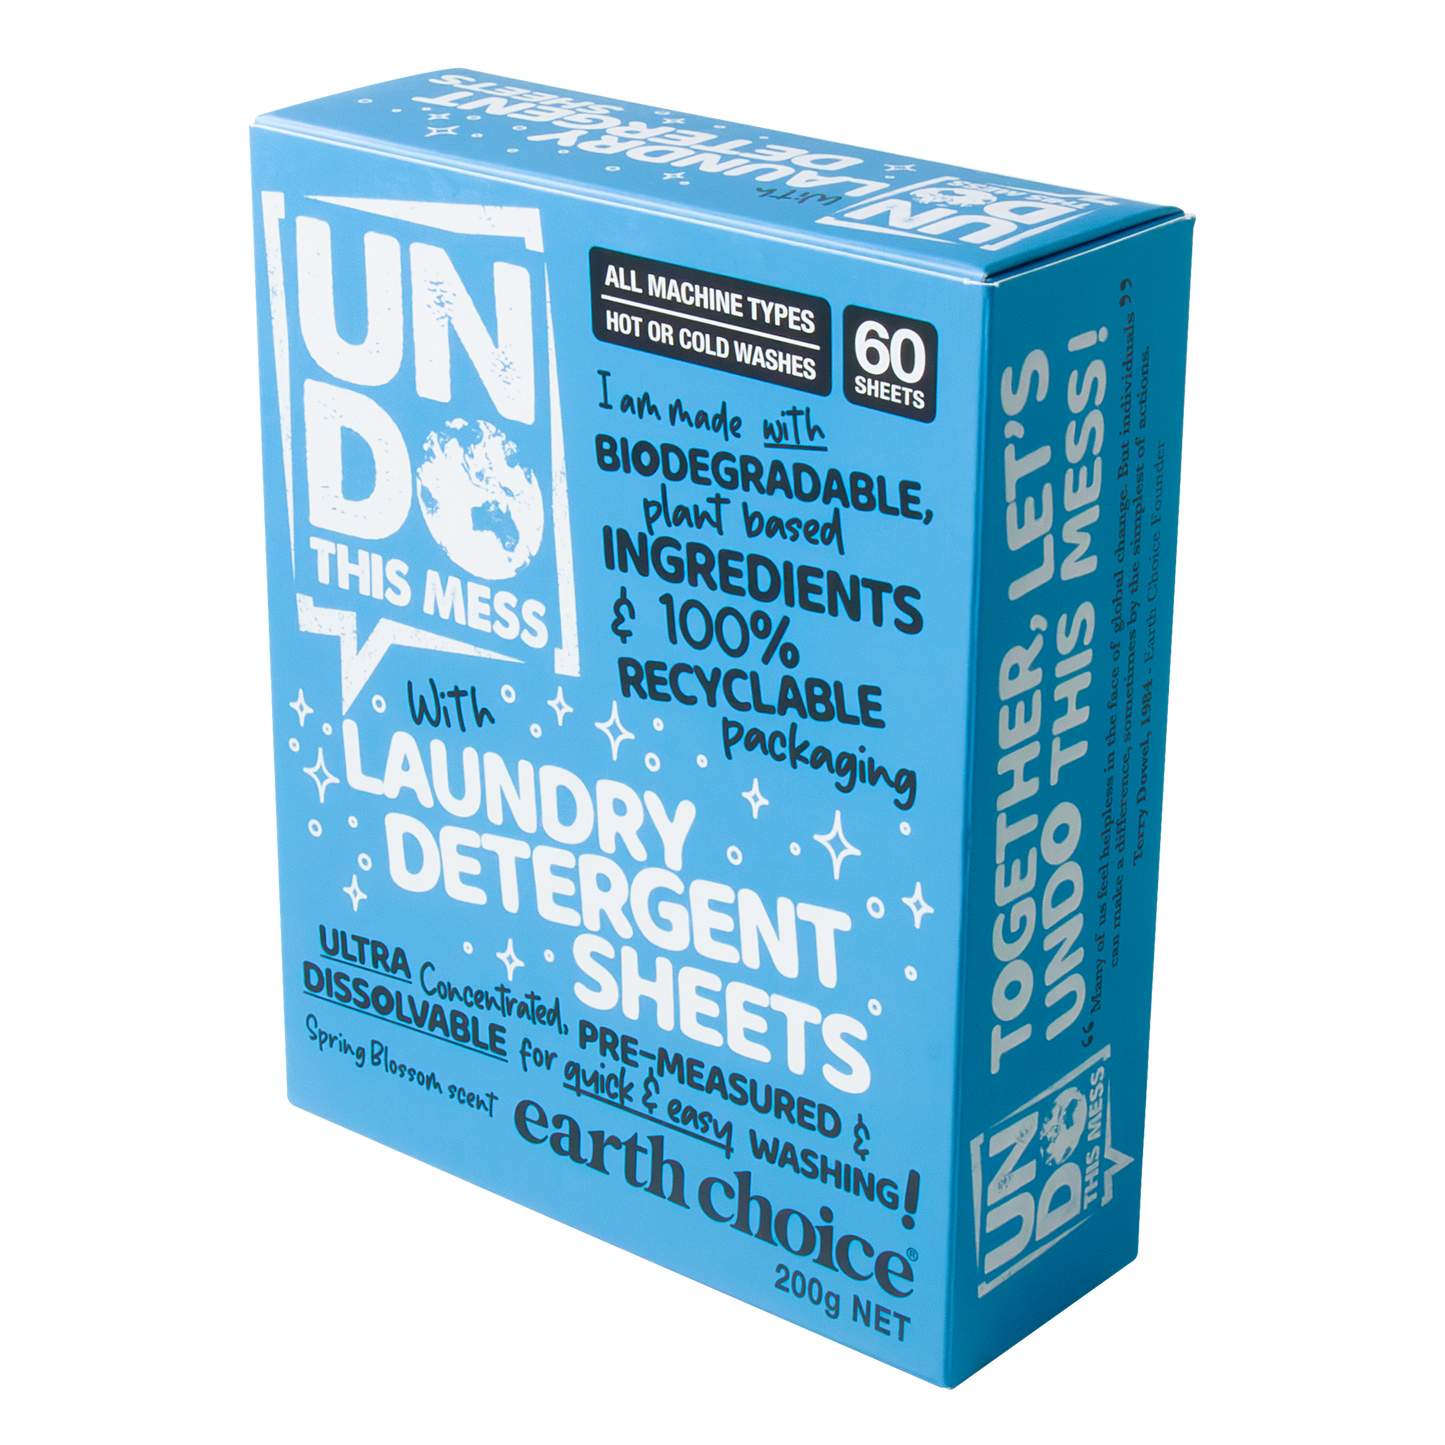 ULTRA CONCENTRATED Laundry Sheets 60 Pack